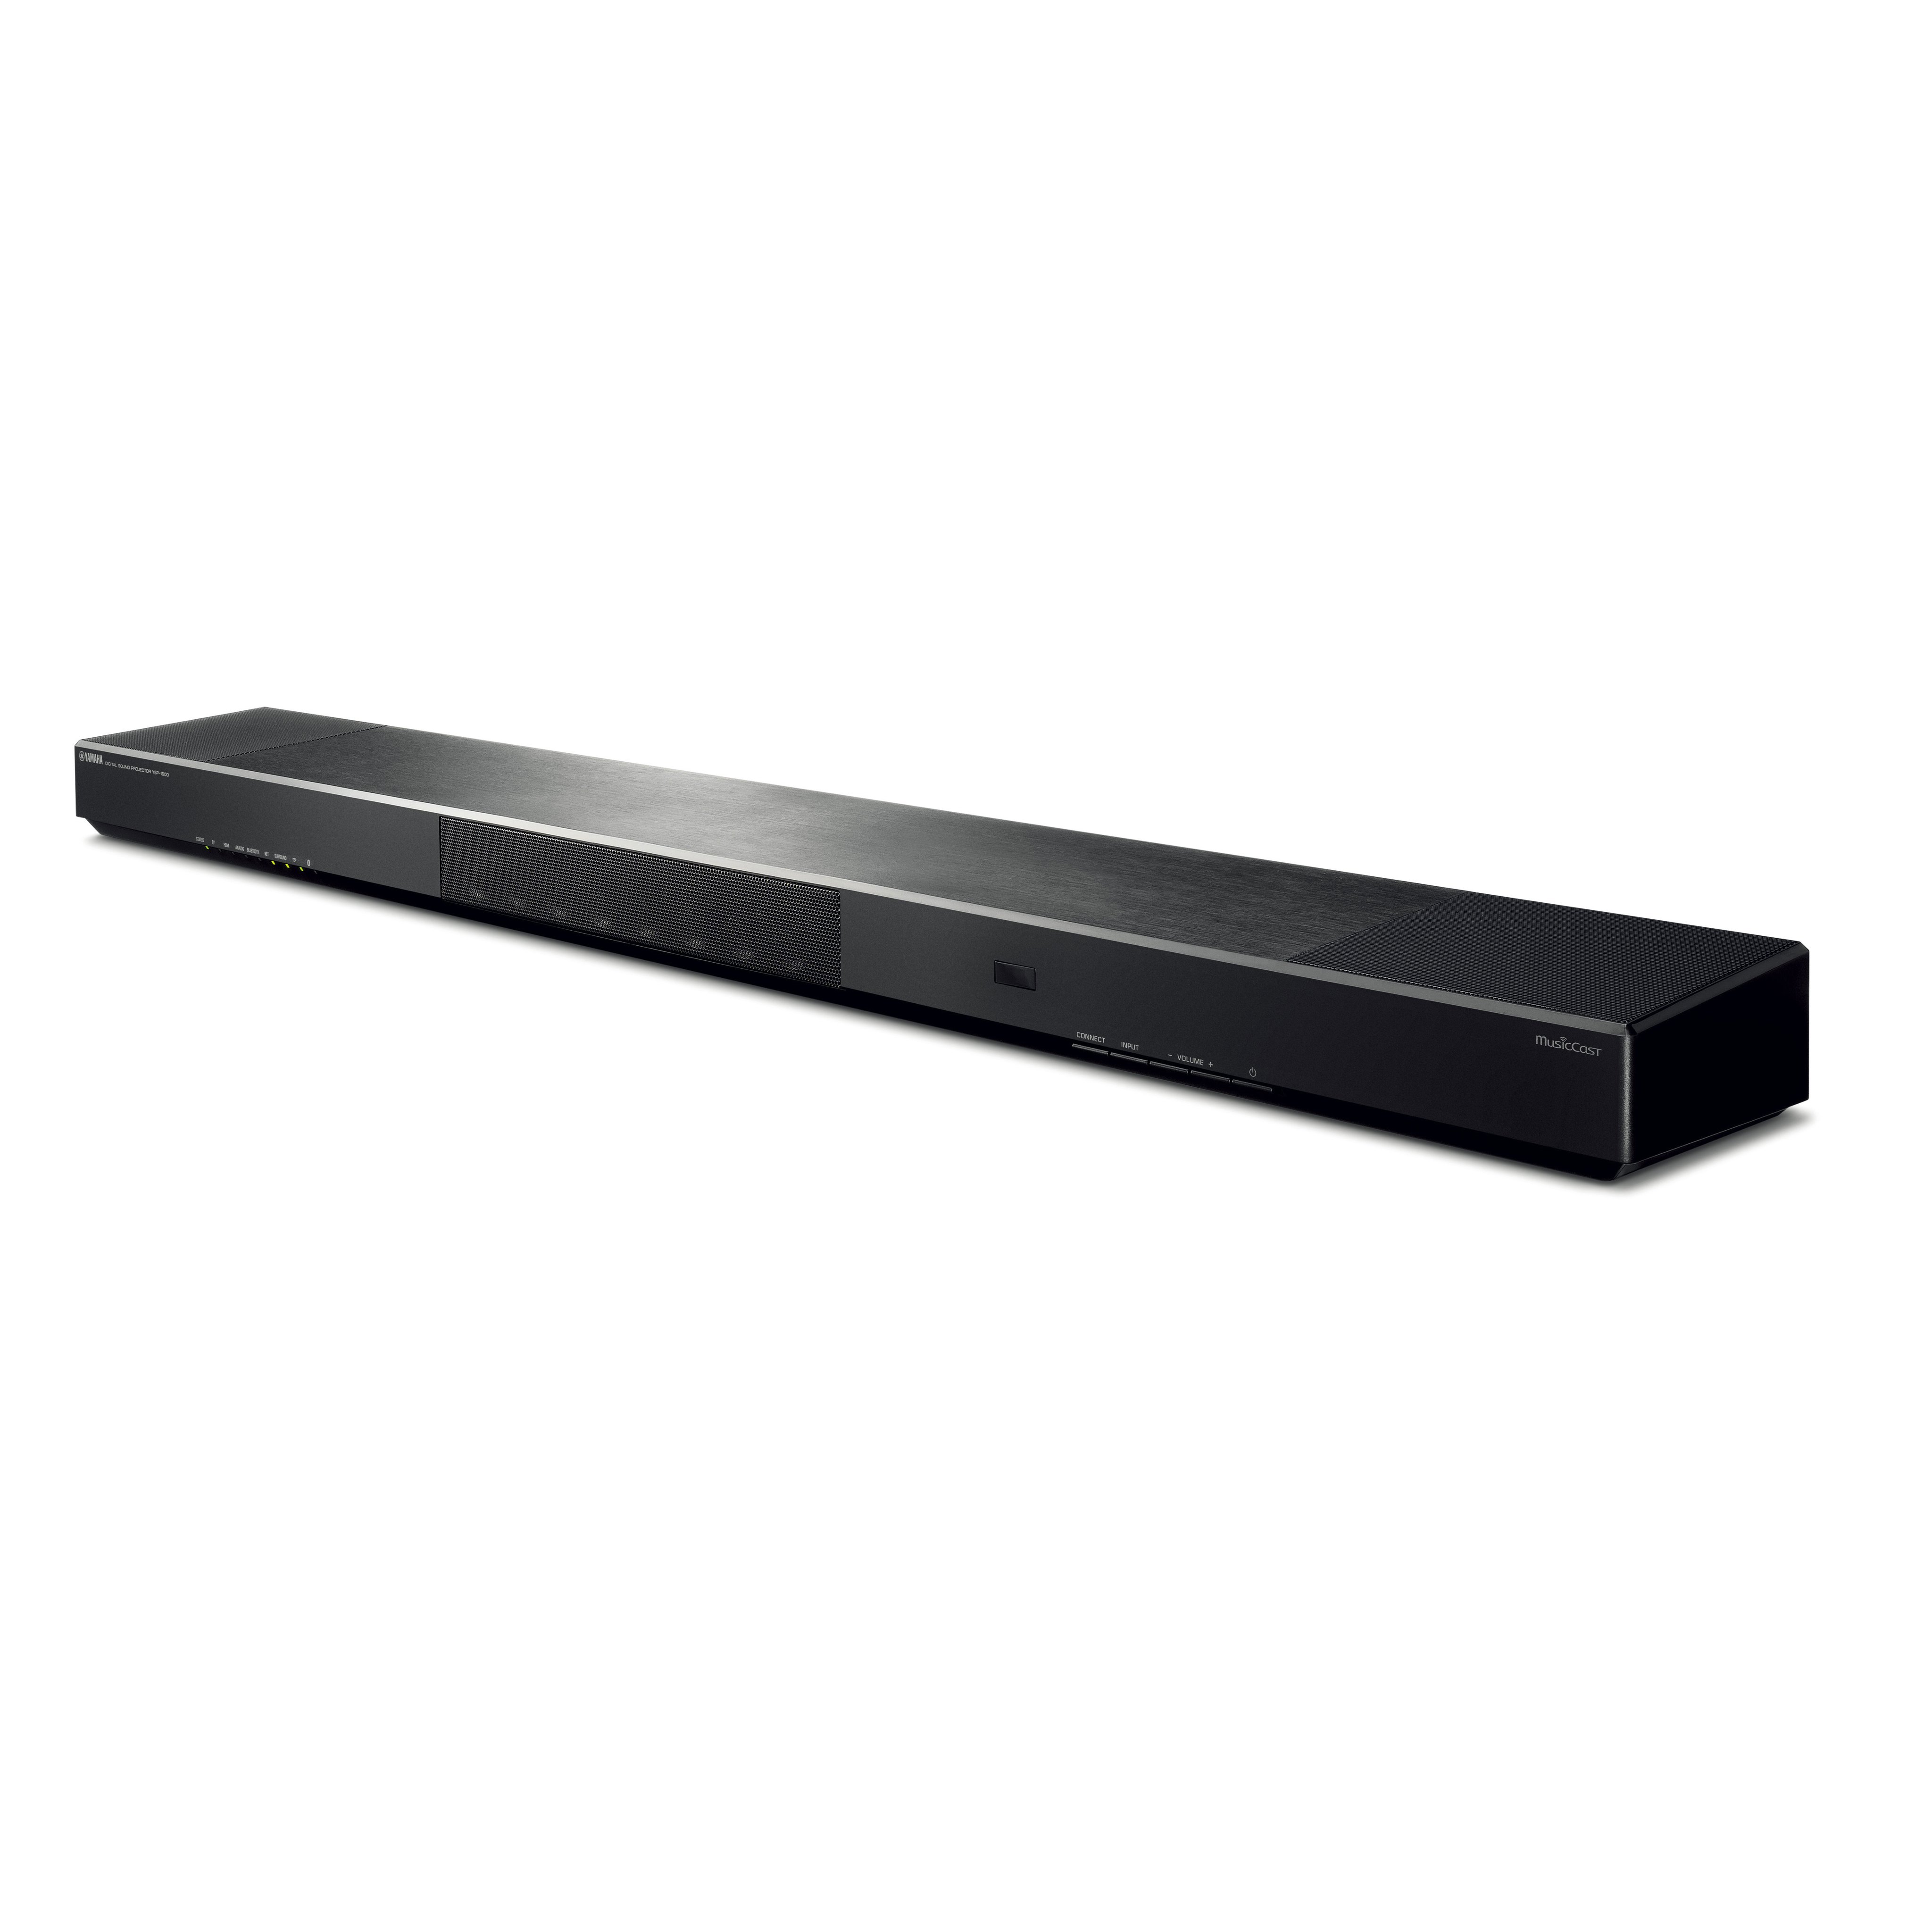 YSP-1600 - Overview - Sound Bar - Audio & Visual - Products